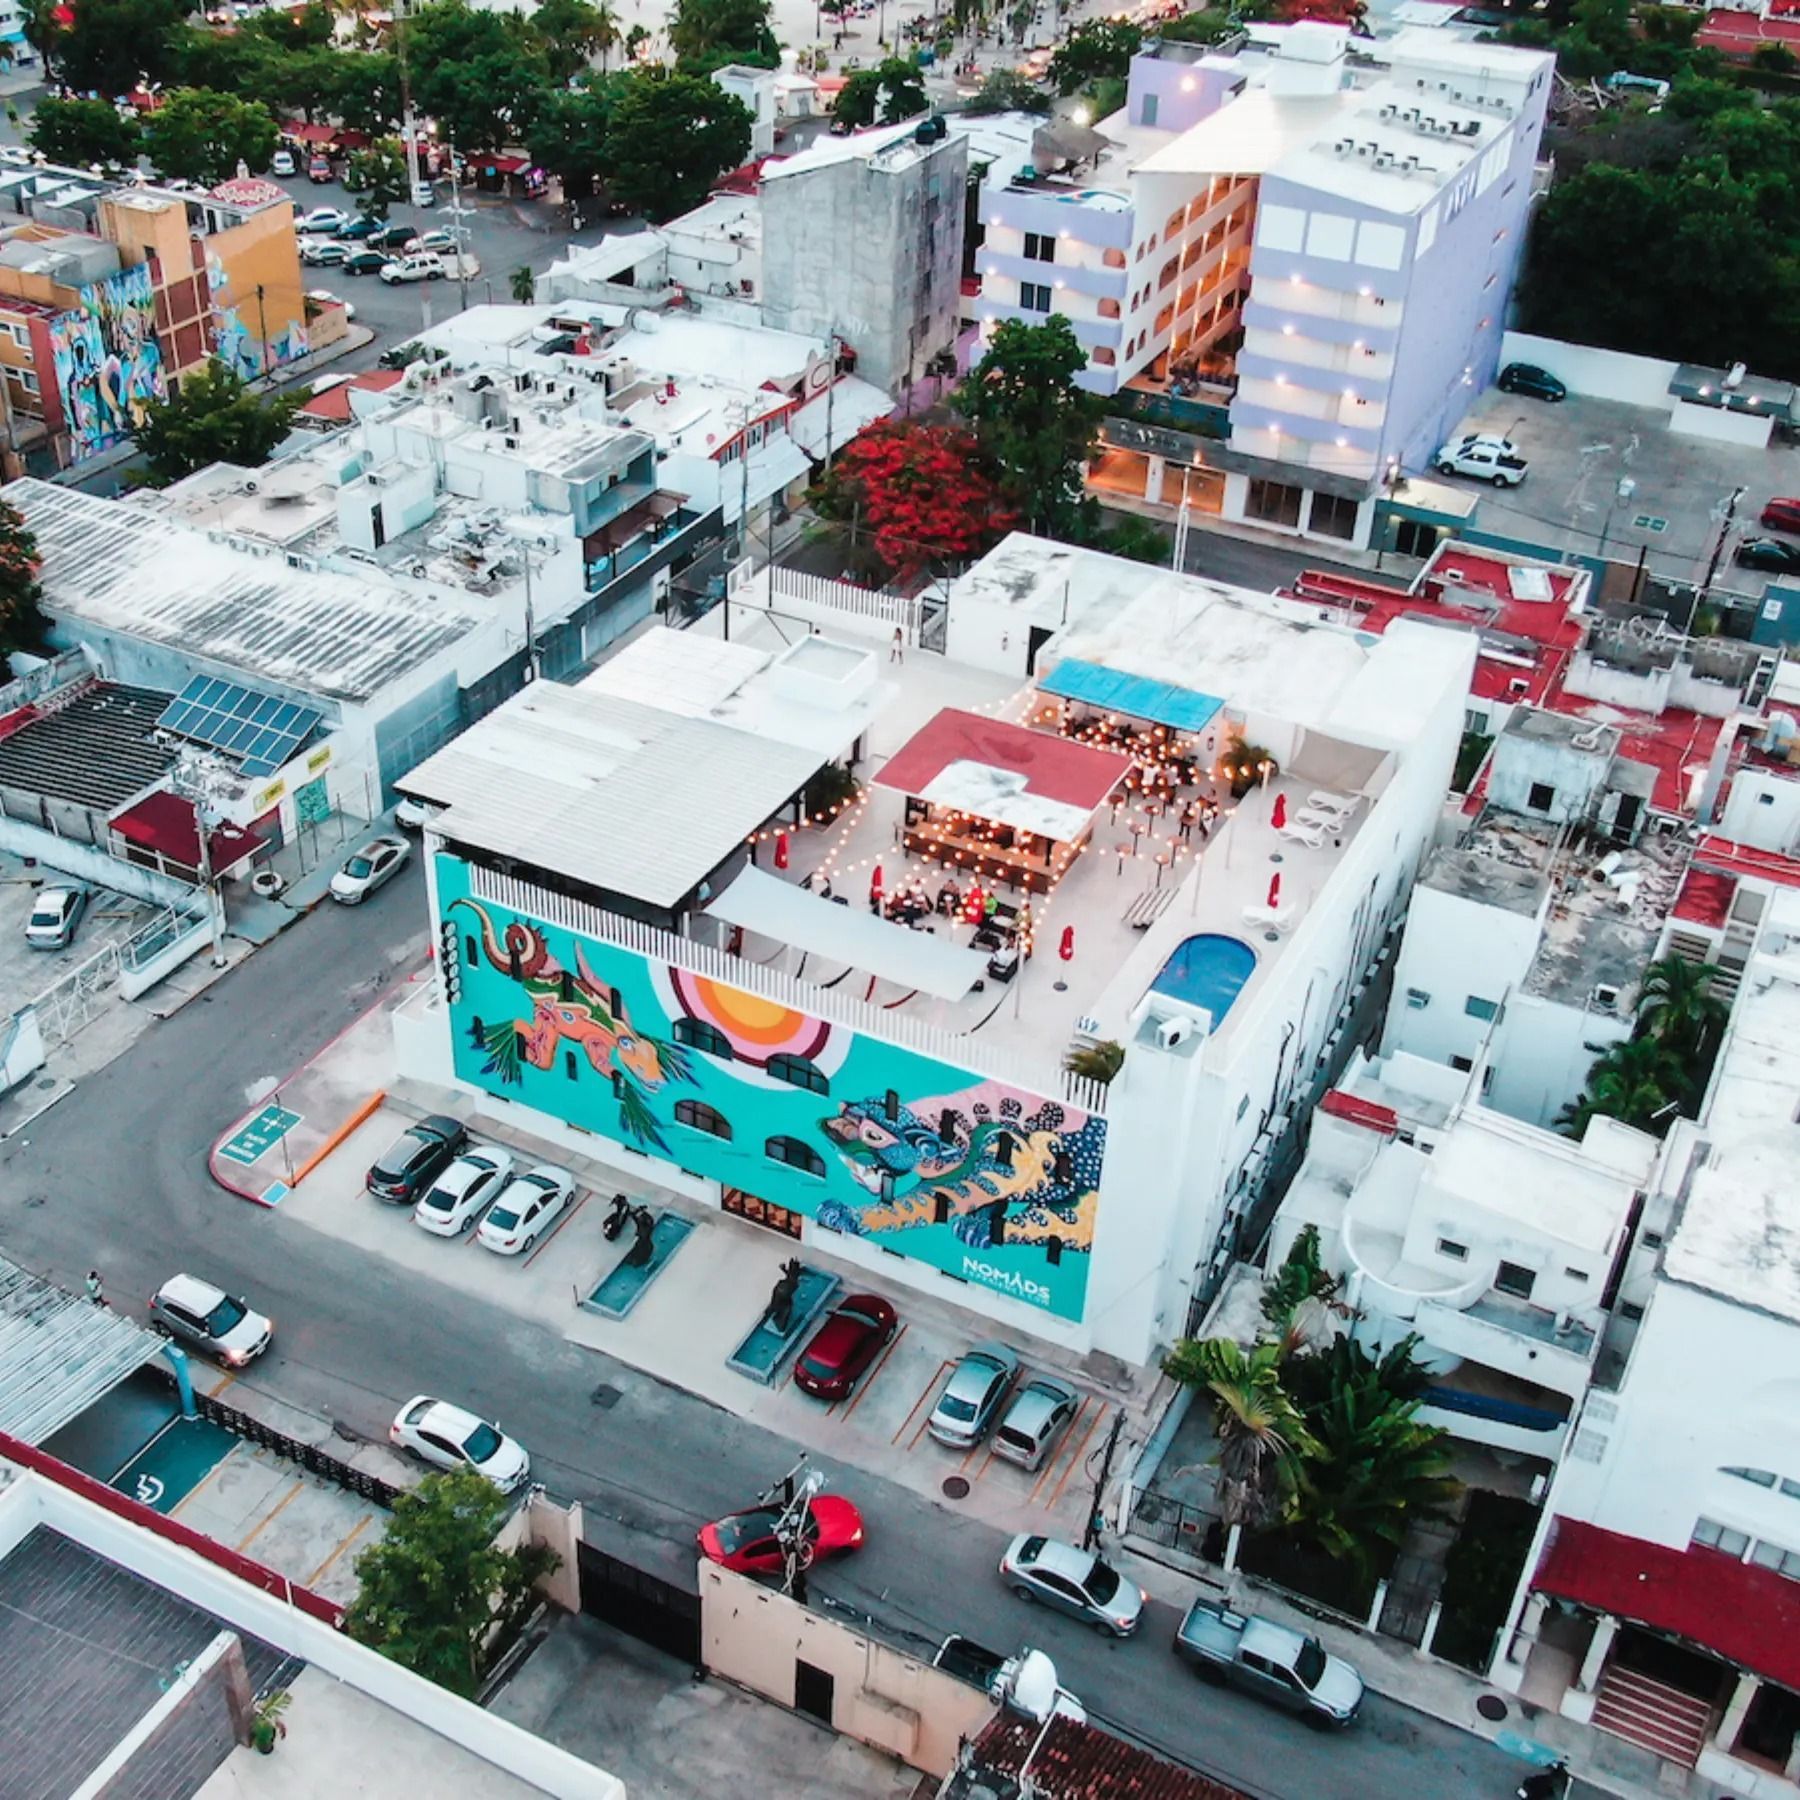 An aerial view of a city with a large mural on the side of a building